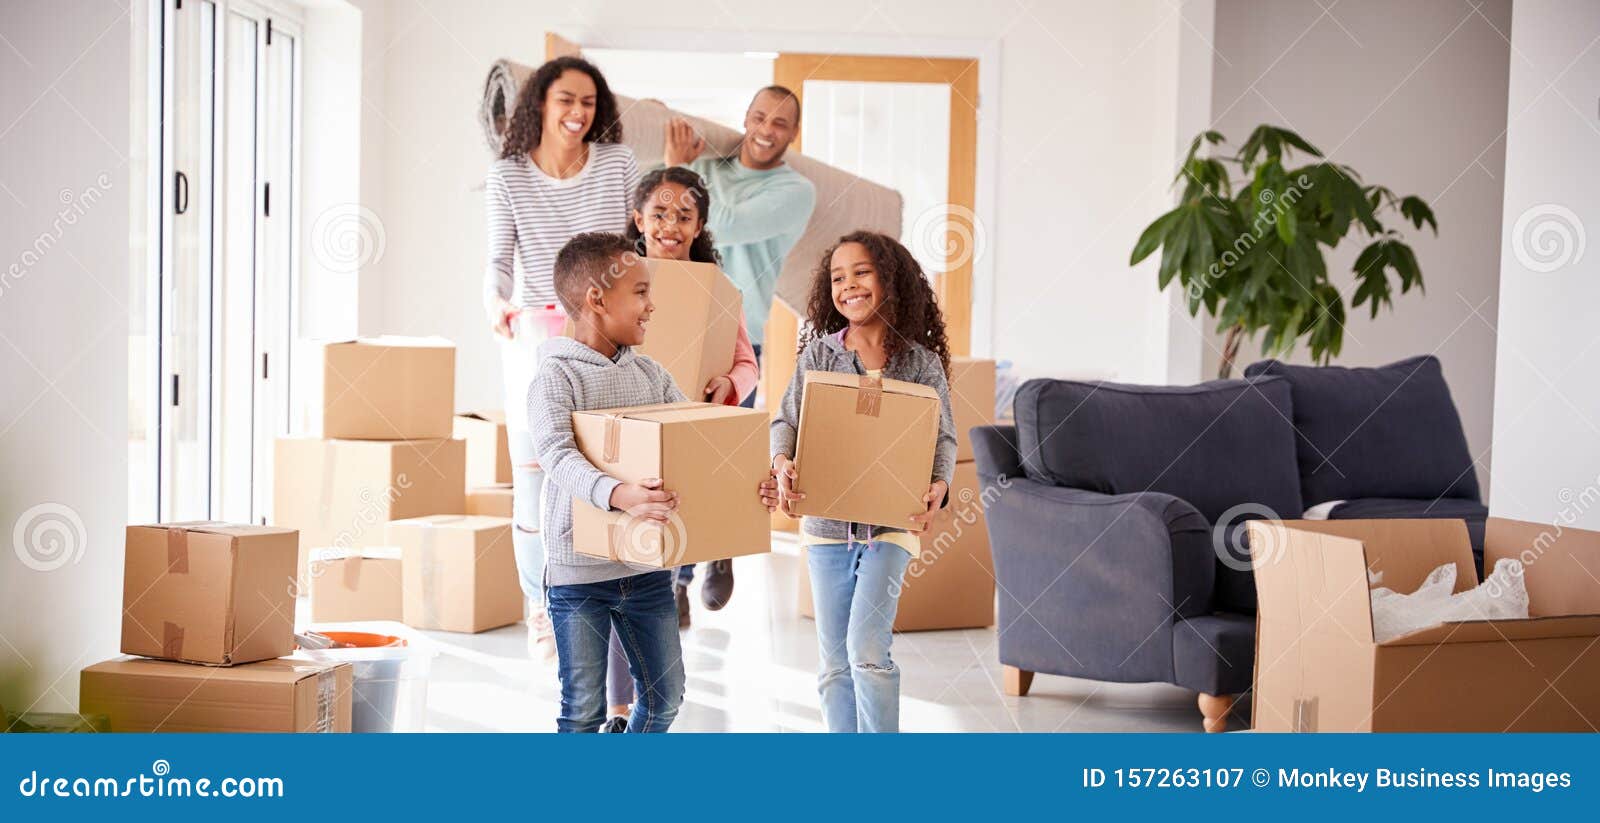 smiling family carrying boxes into new home on moving day